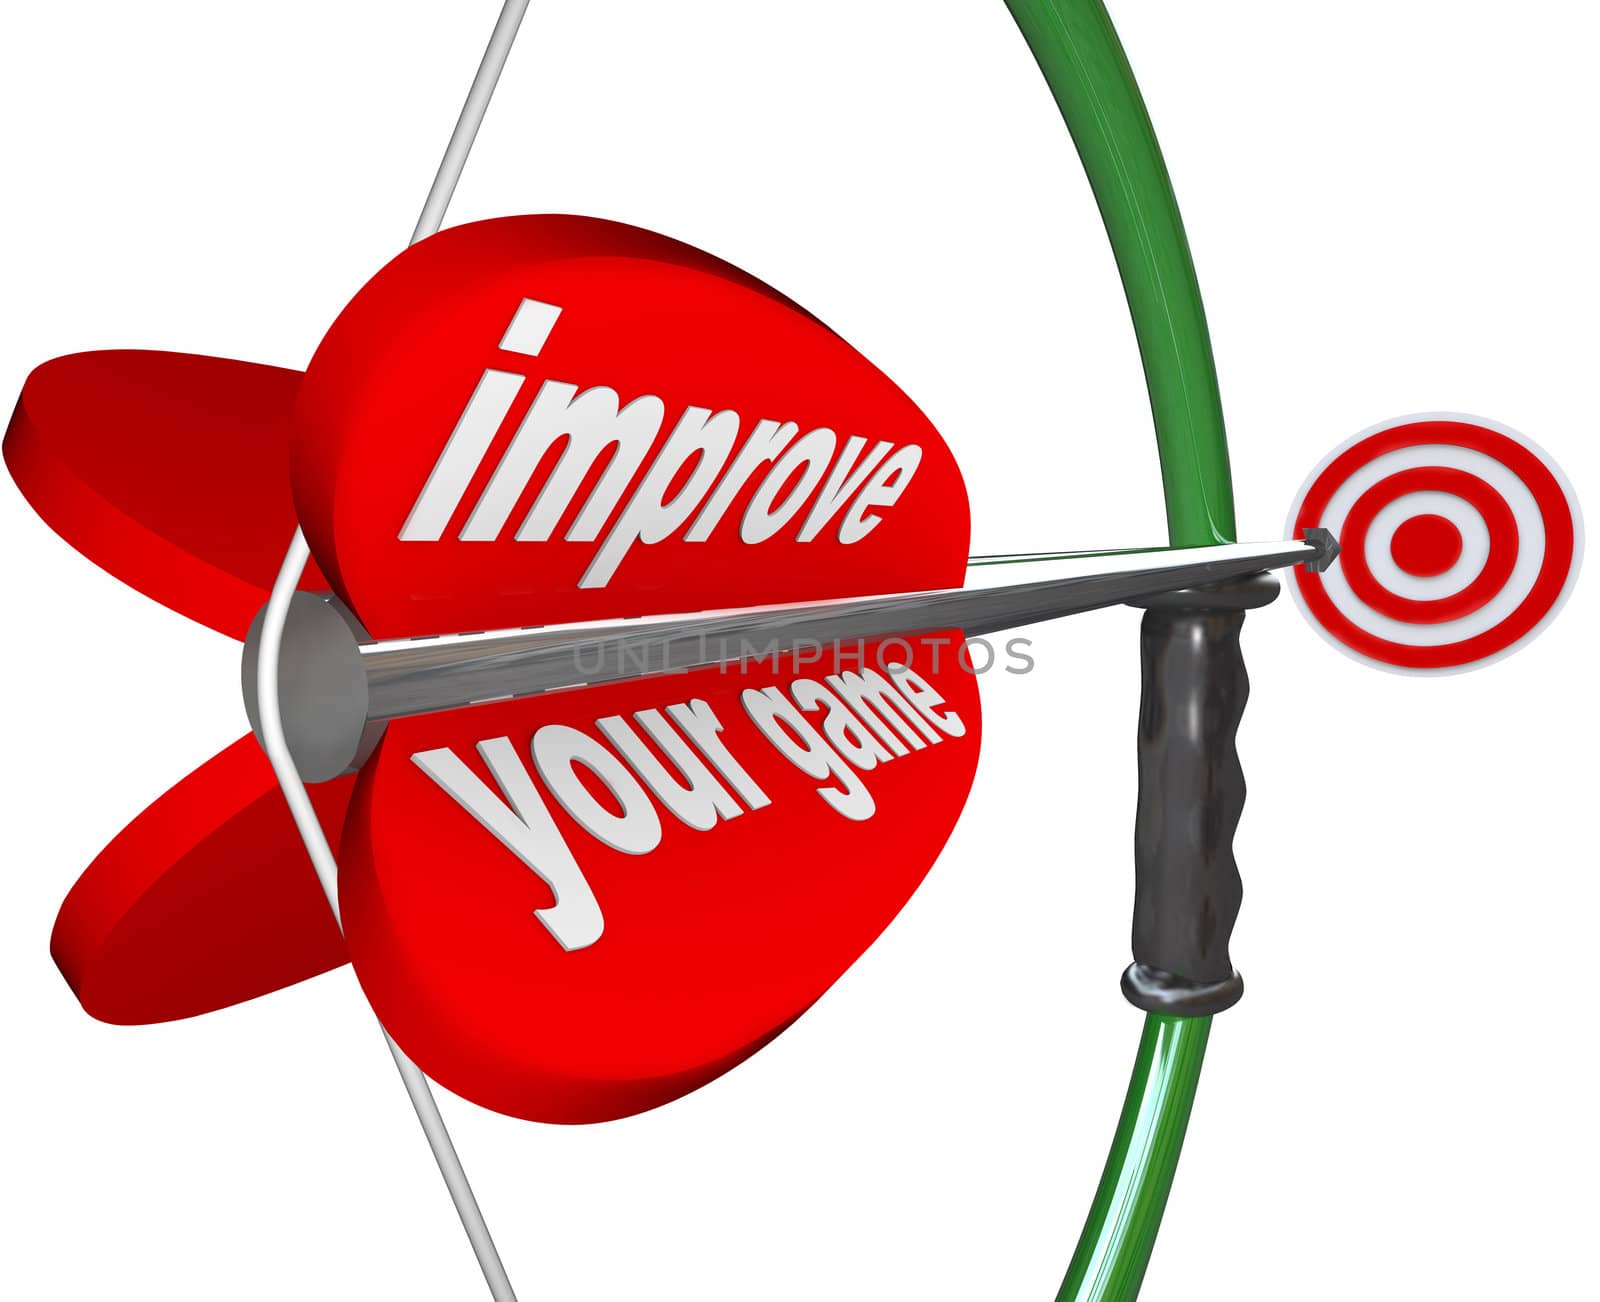 The words Improve Your Game on an arrow and bow aiming at a target representing the improvement of your skills in order to win a competition or achieve success in business or life